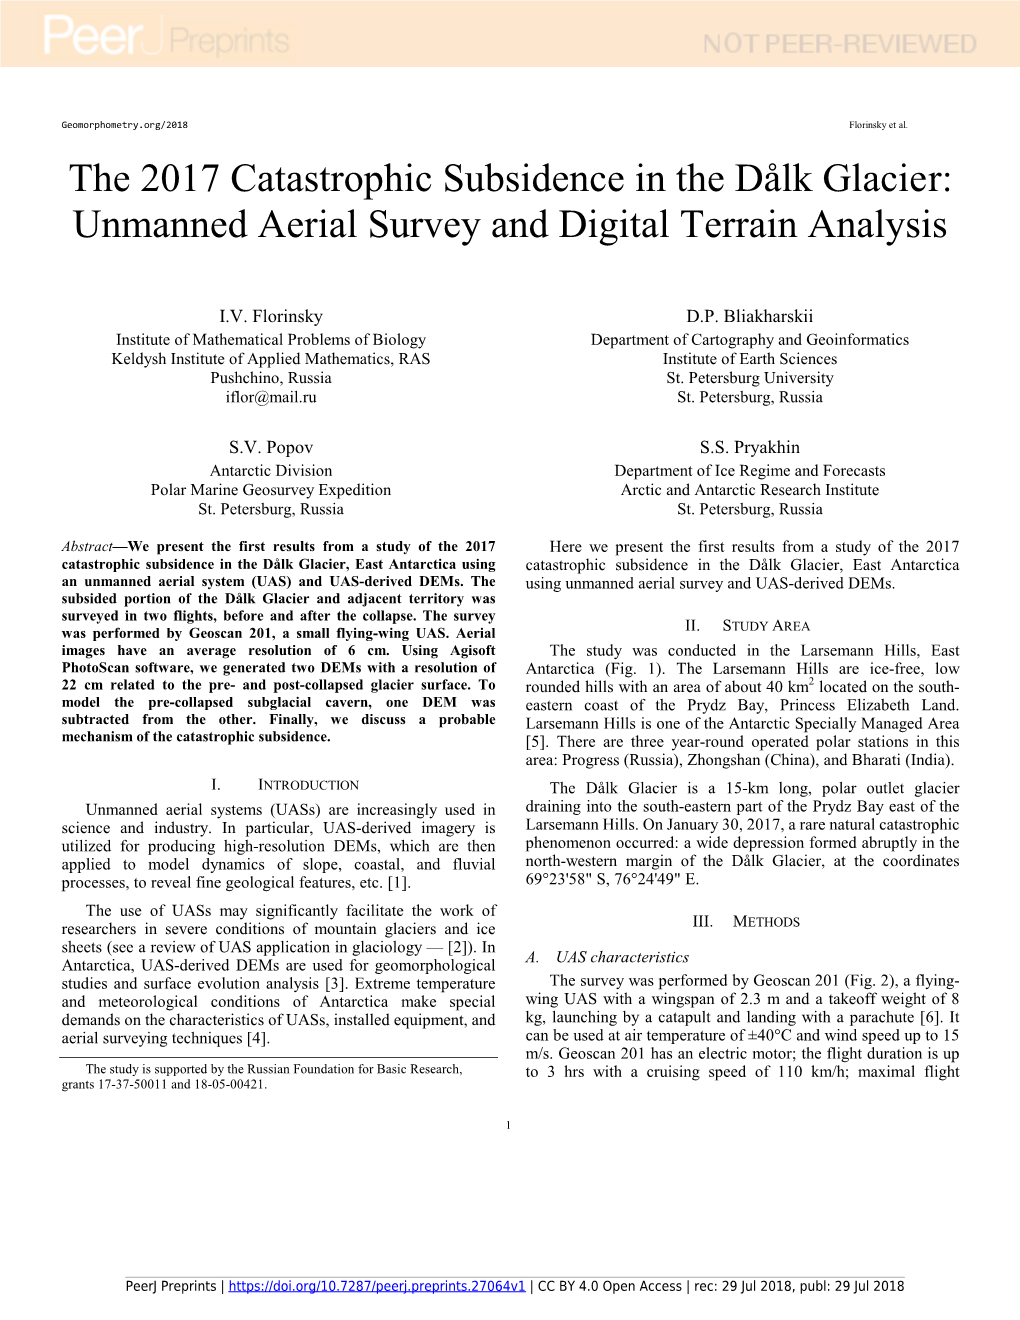 The 2017 Catastrophic Subsidence in the Dålk Glacier: Unmanned Aerial Survey and Digital Terrain Analysis